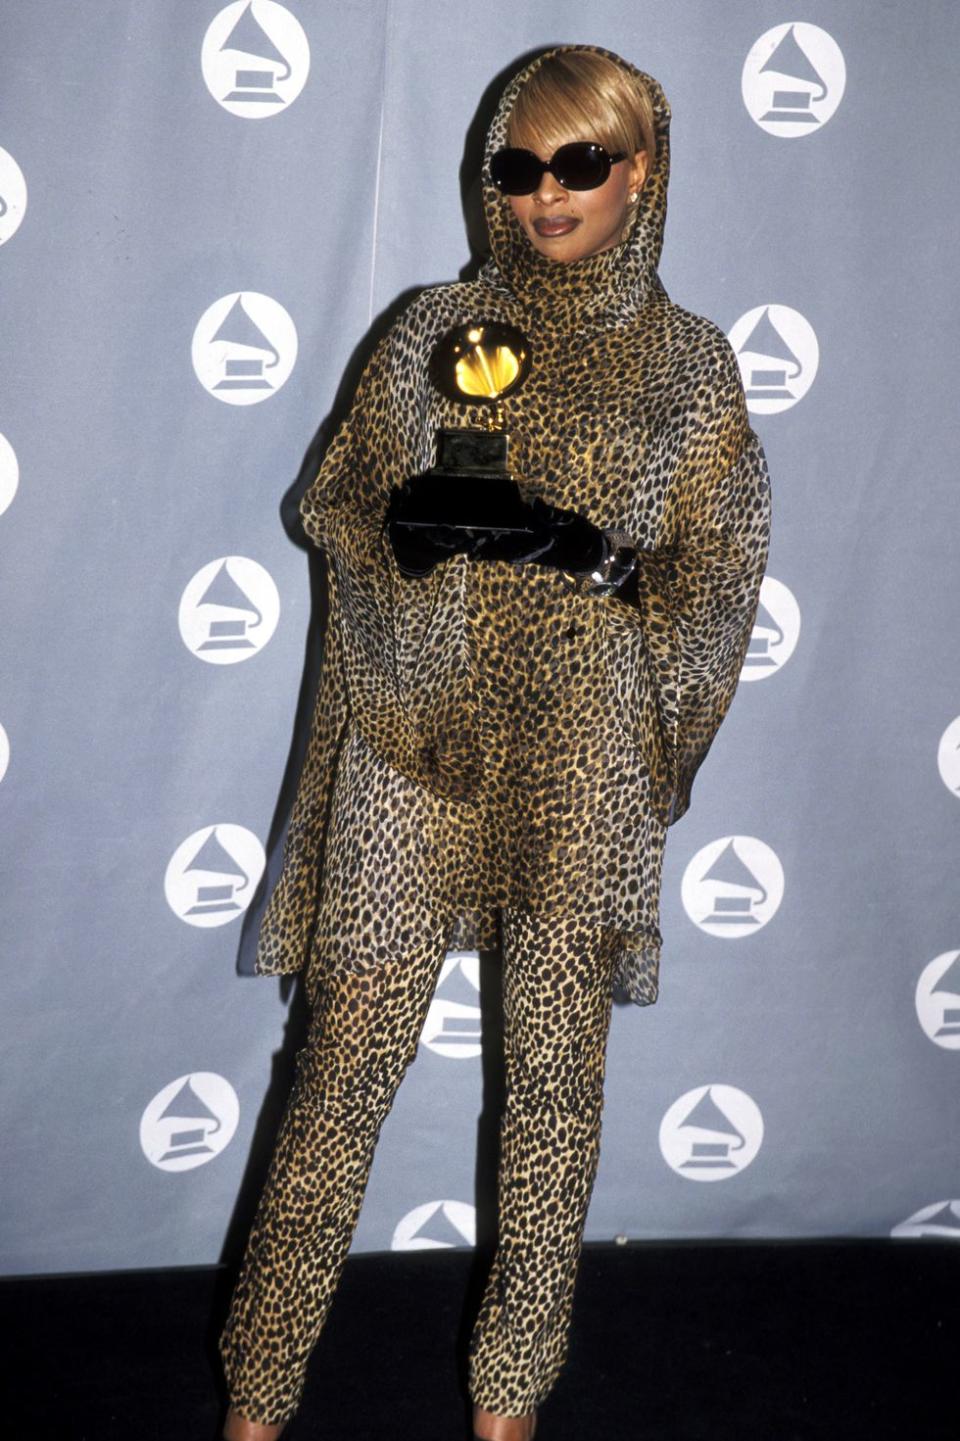 <p> In 1996, Mary J. Blige attended the Grammy Awards wearing a full leopard print ensemble with velvet gloves and dark sunglasses. It&apos;s safe to say this print will never go out of style. What a lewk. </p>